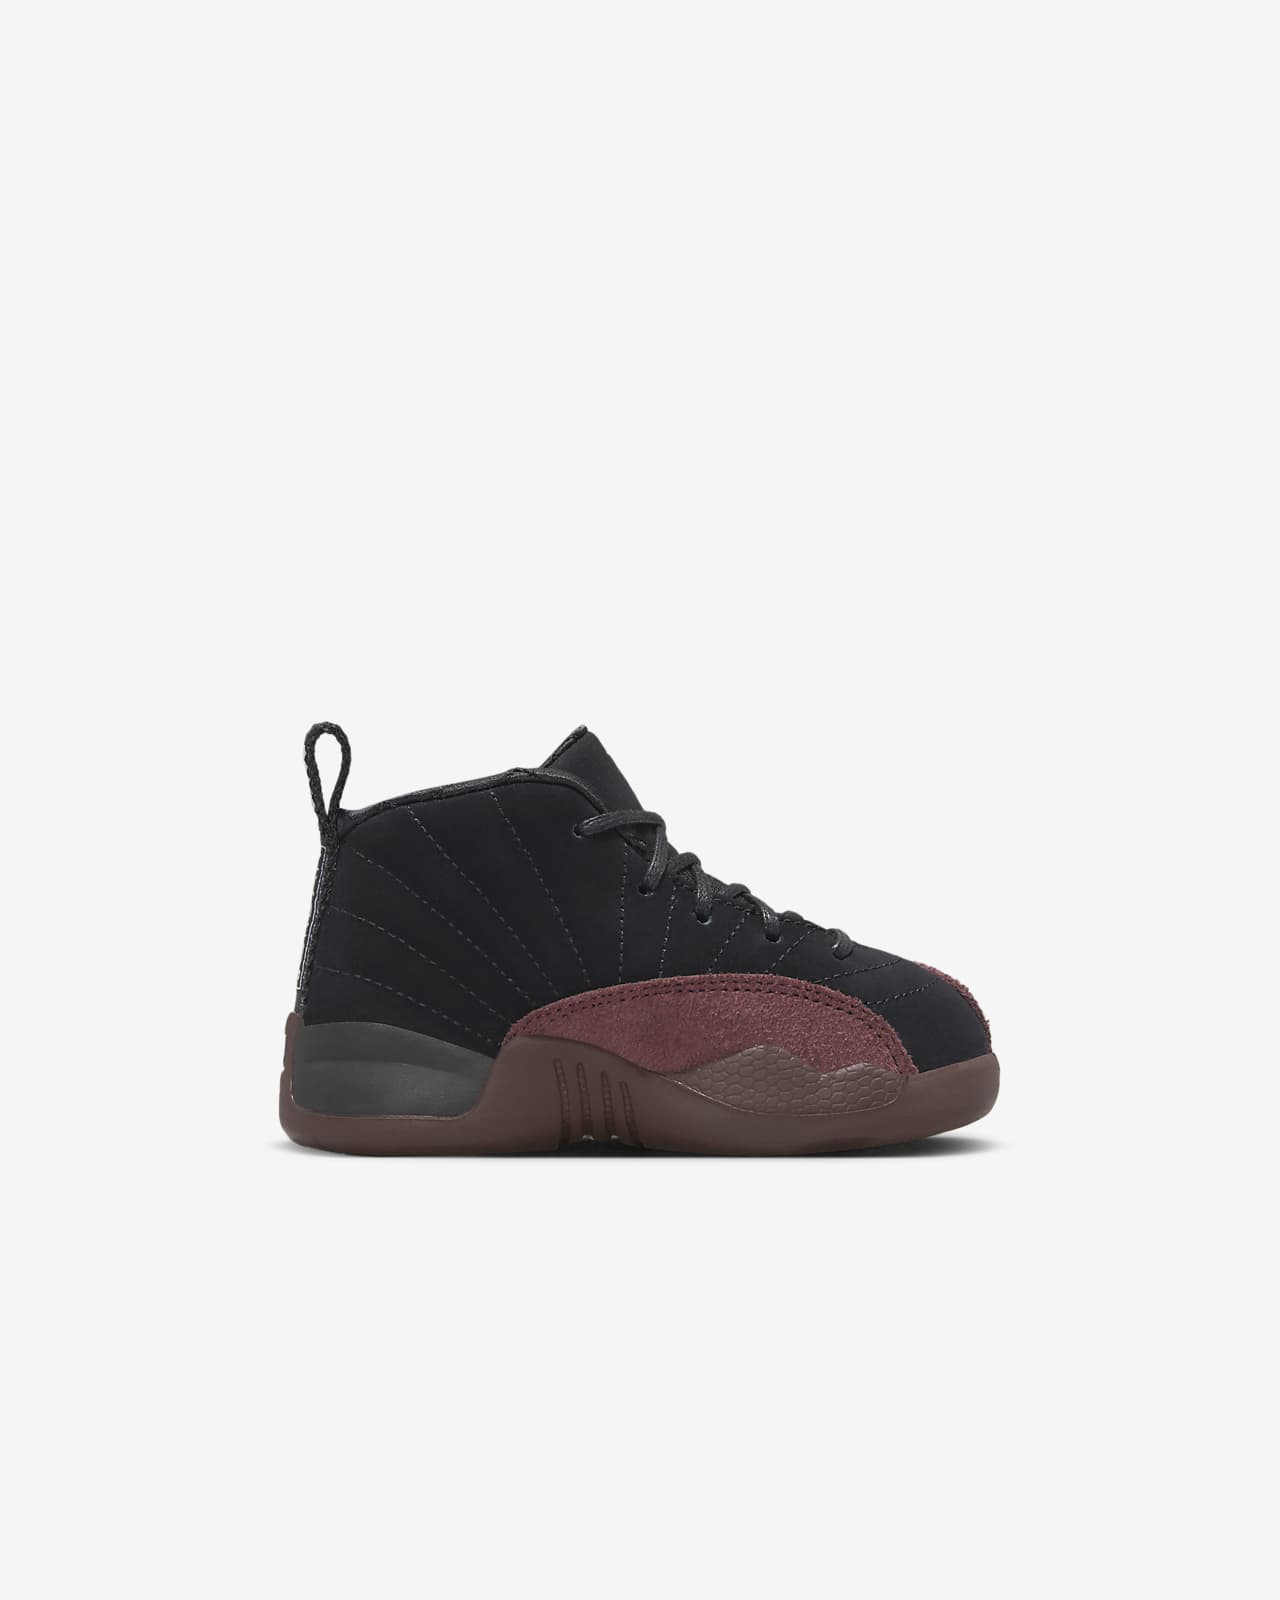 Jordan 12 x A Ma Maniére Baby/Toddler Shoes